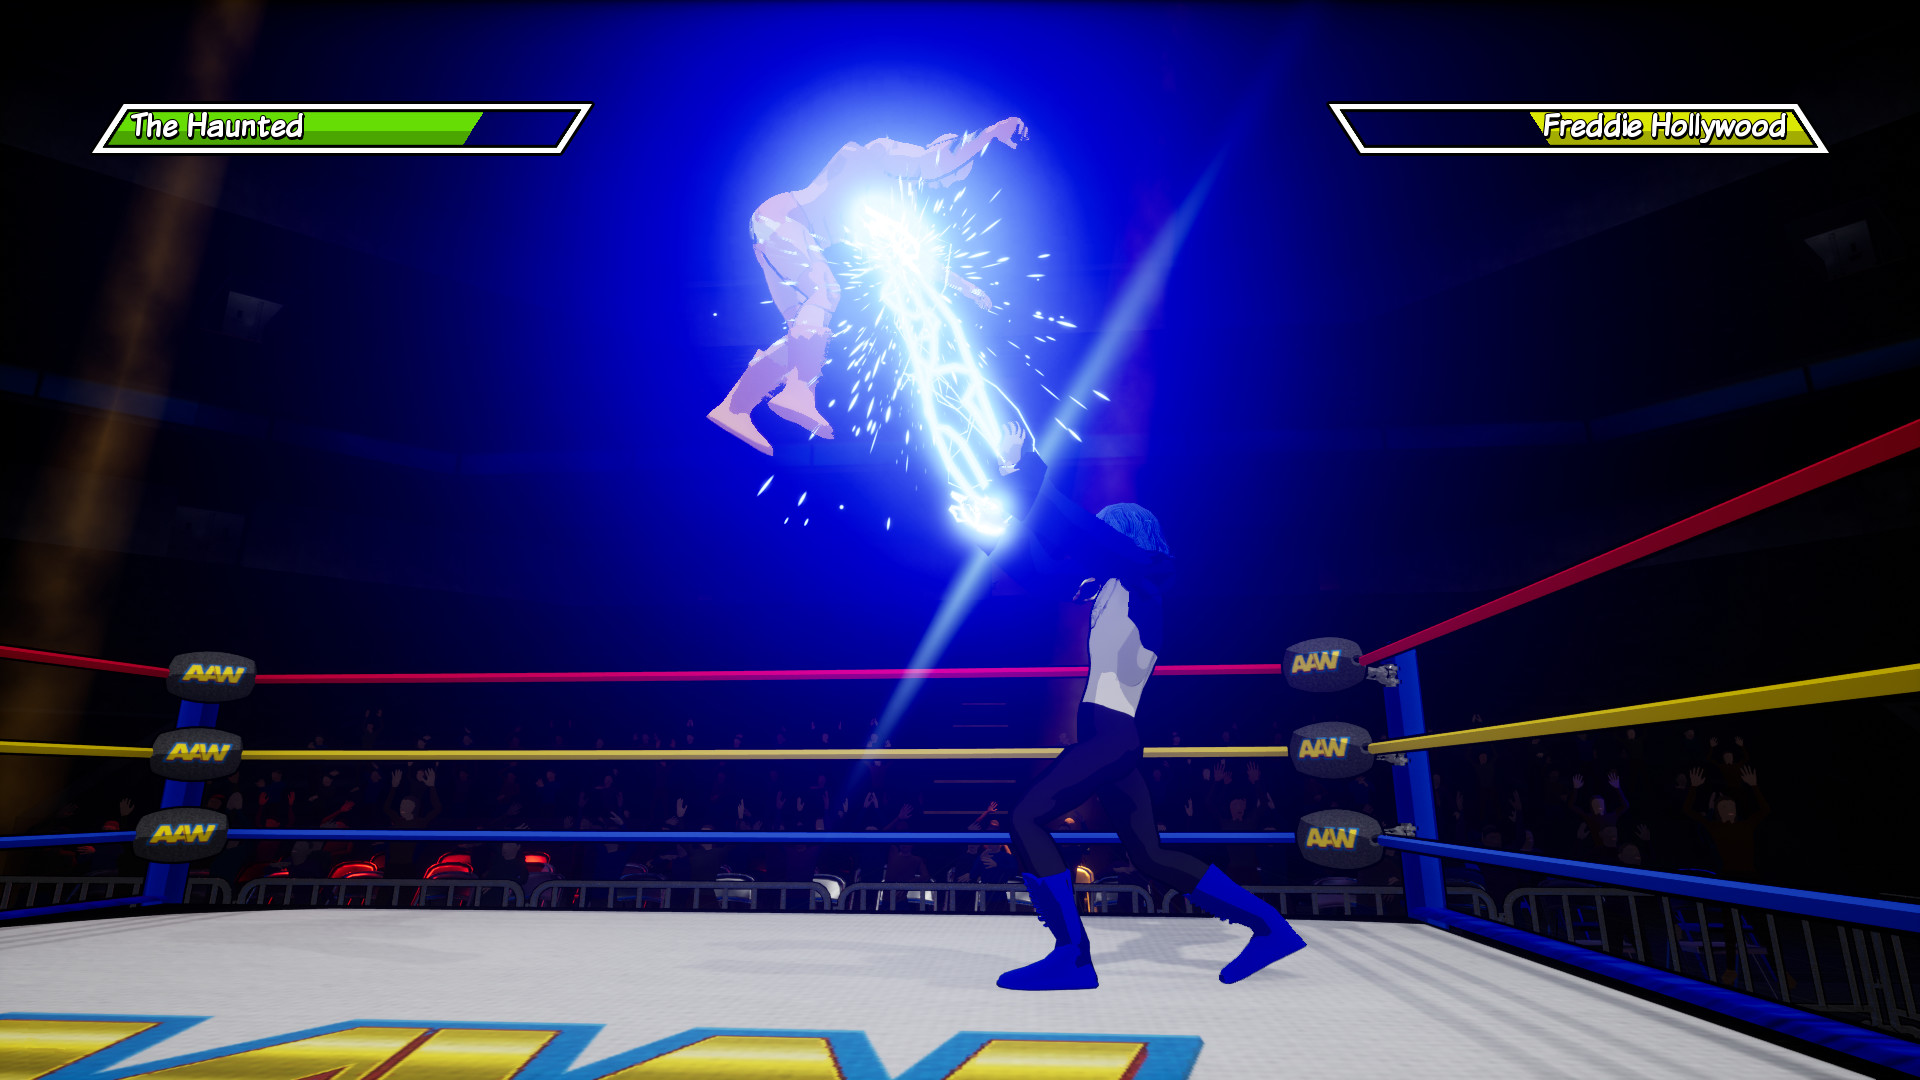 ring of chaos wrestling game